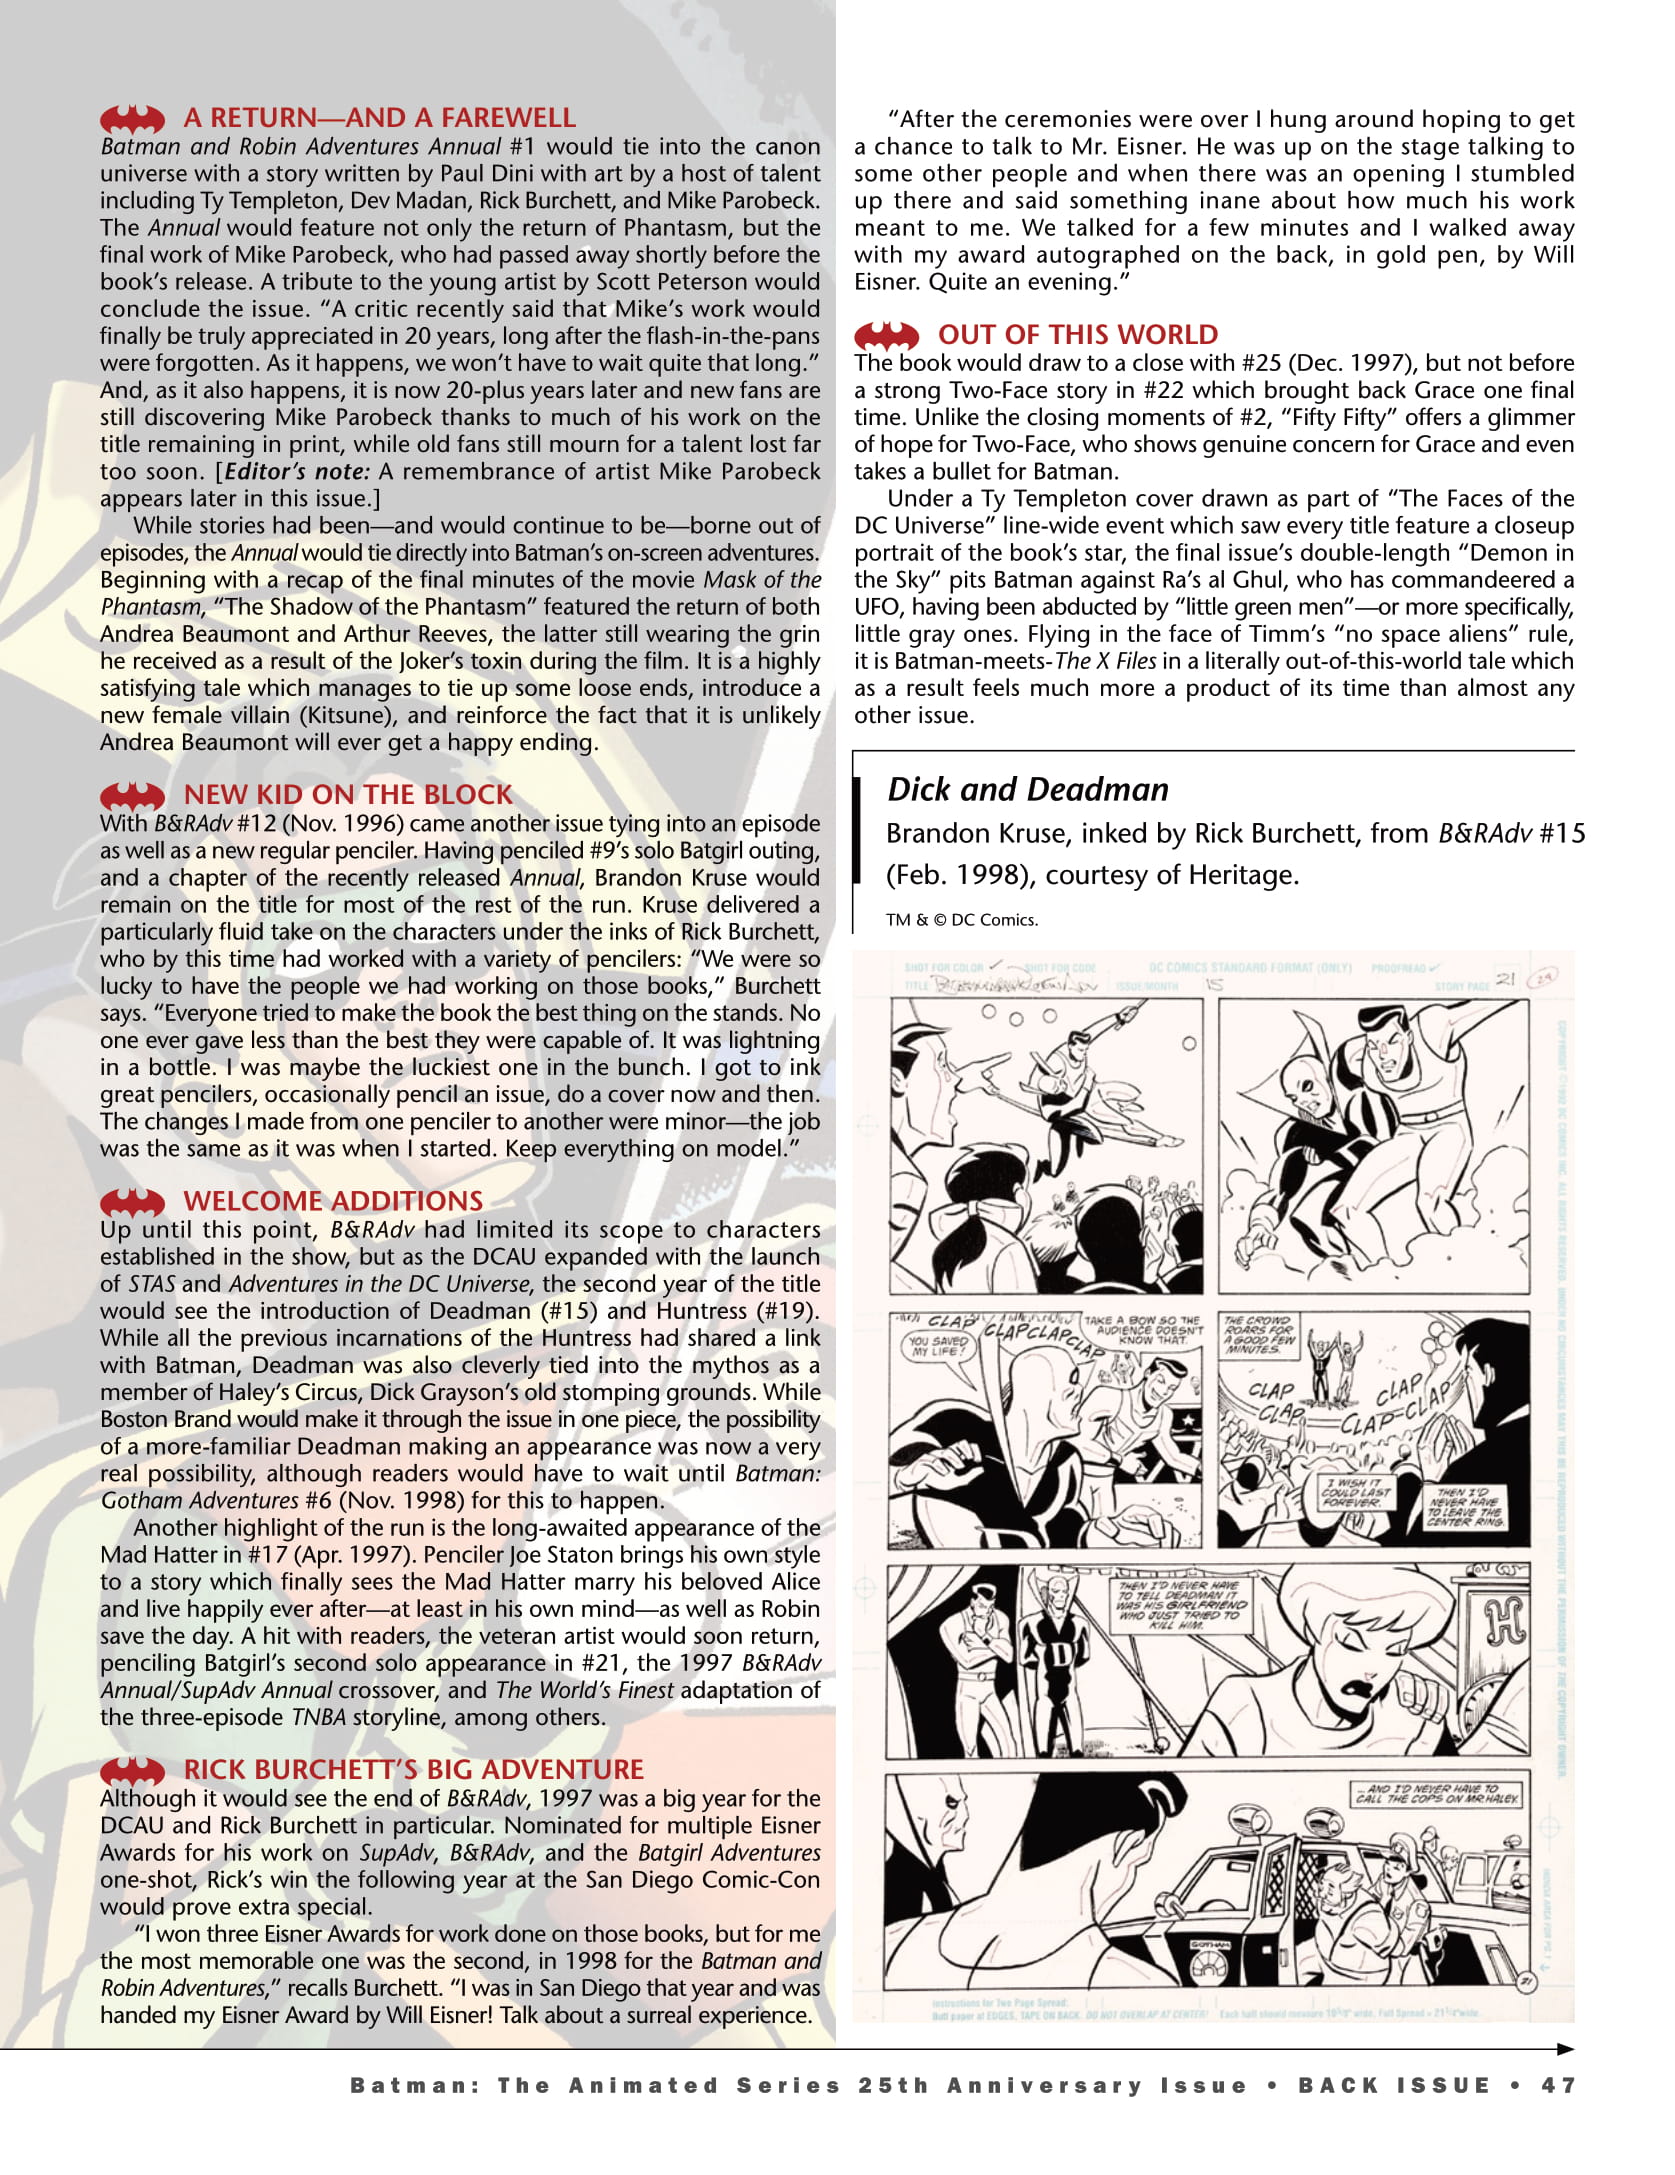 Read online Back Issue comic -  Issue #99 - 49